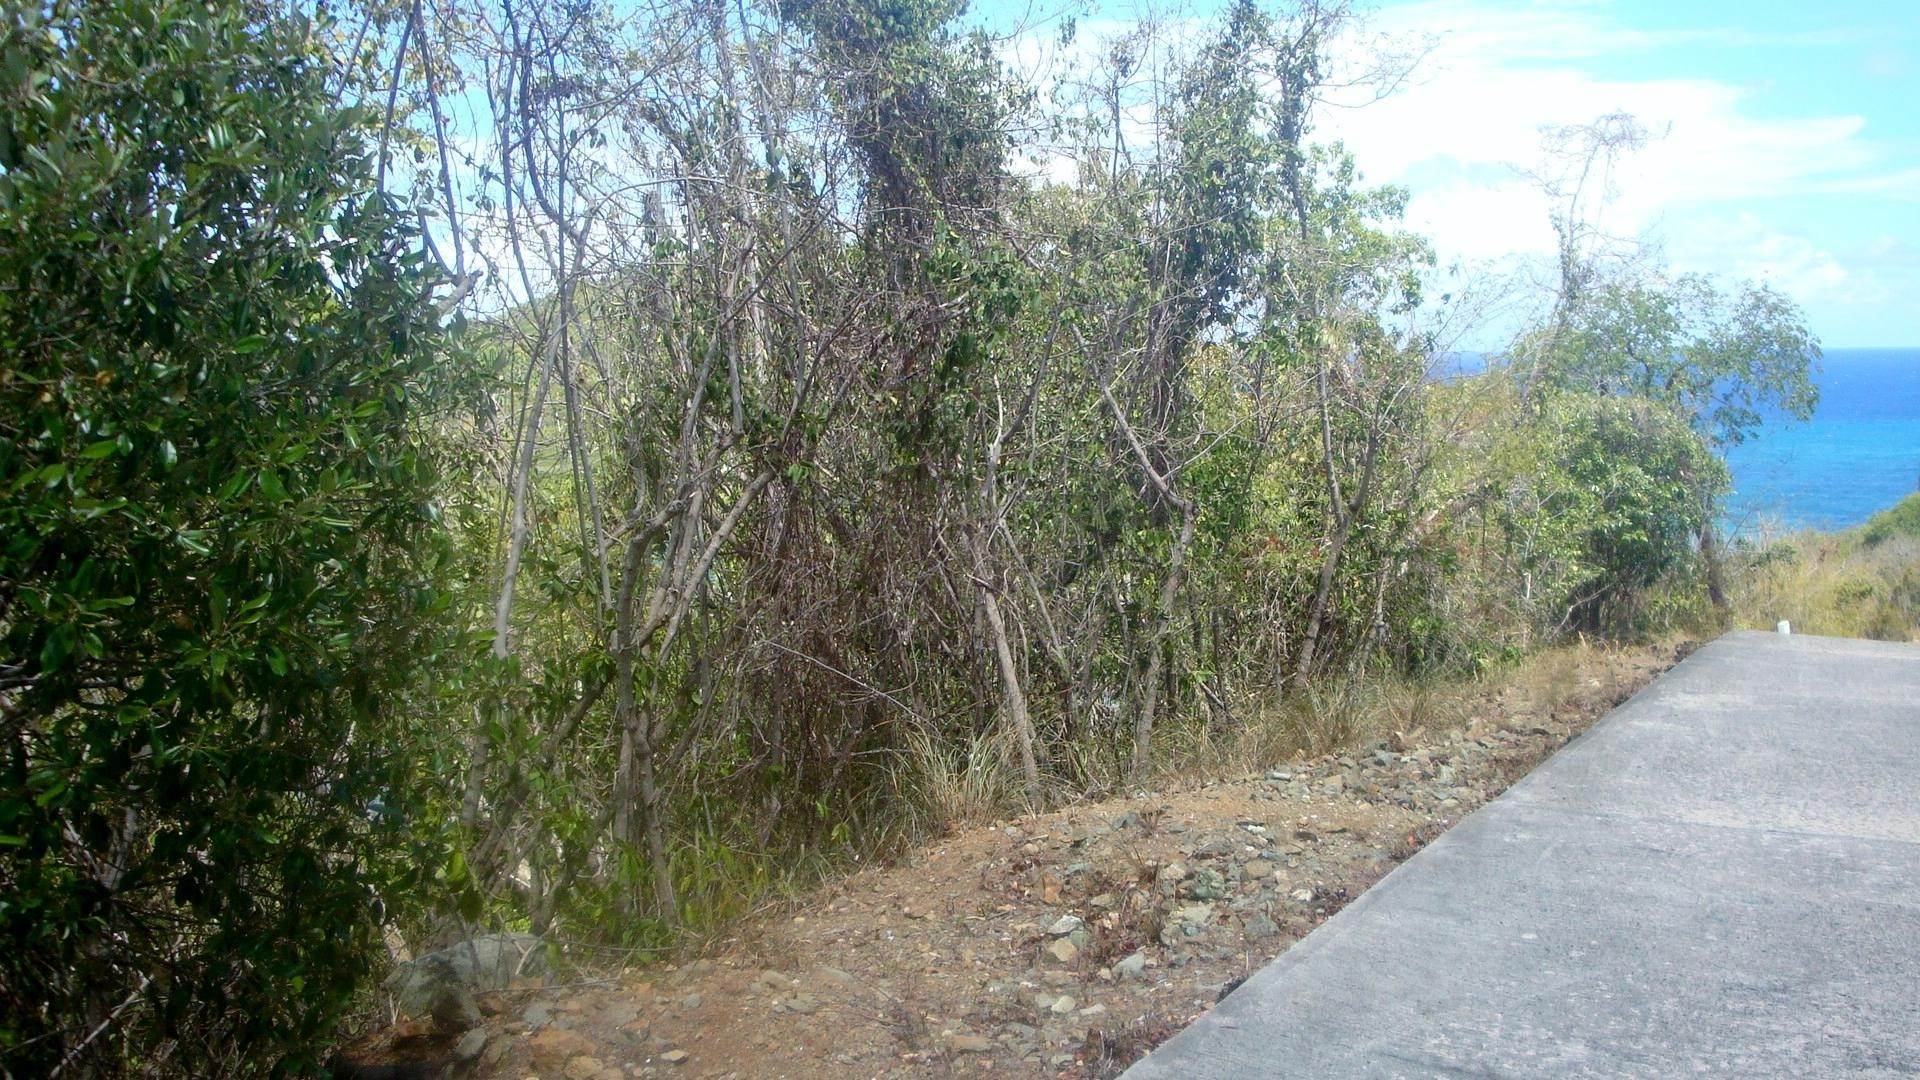 1. Land for Sale at 15A-8-B-6 Rendezvous & Ditleff St Croix, Virgin Islands 00830 United States Virgin Islands